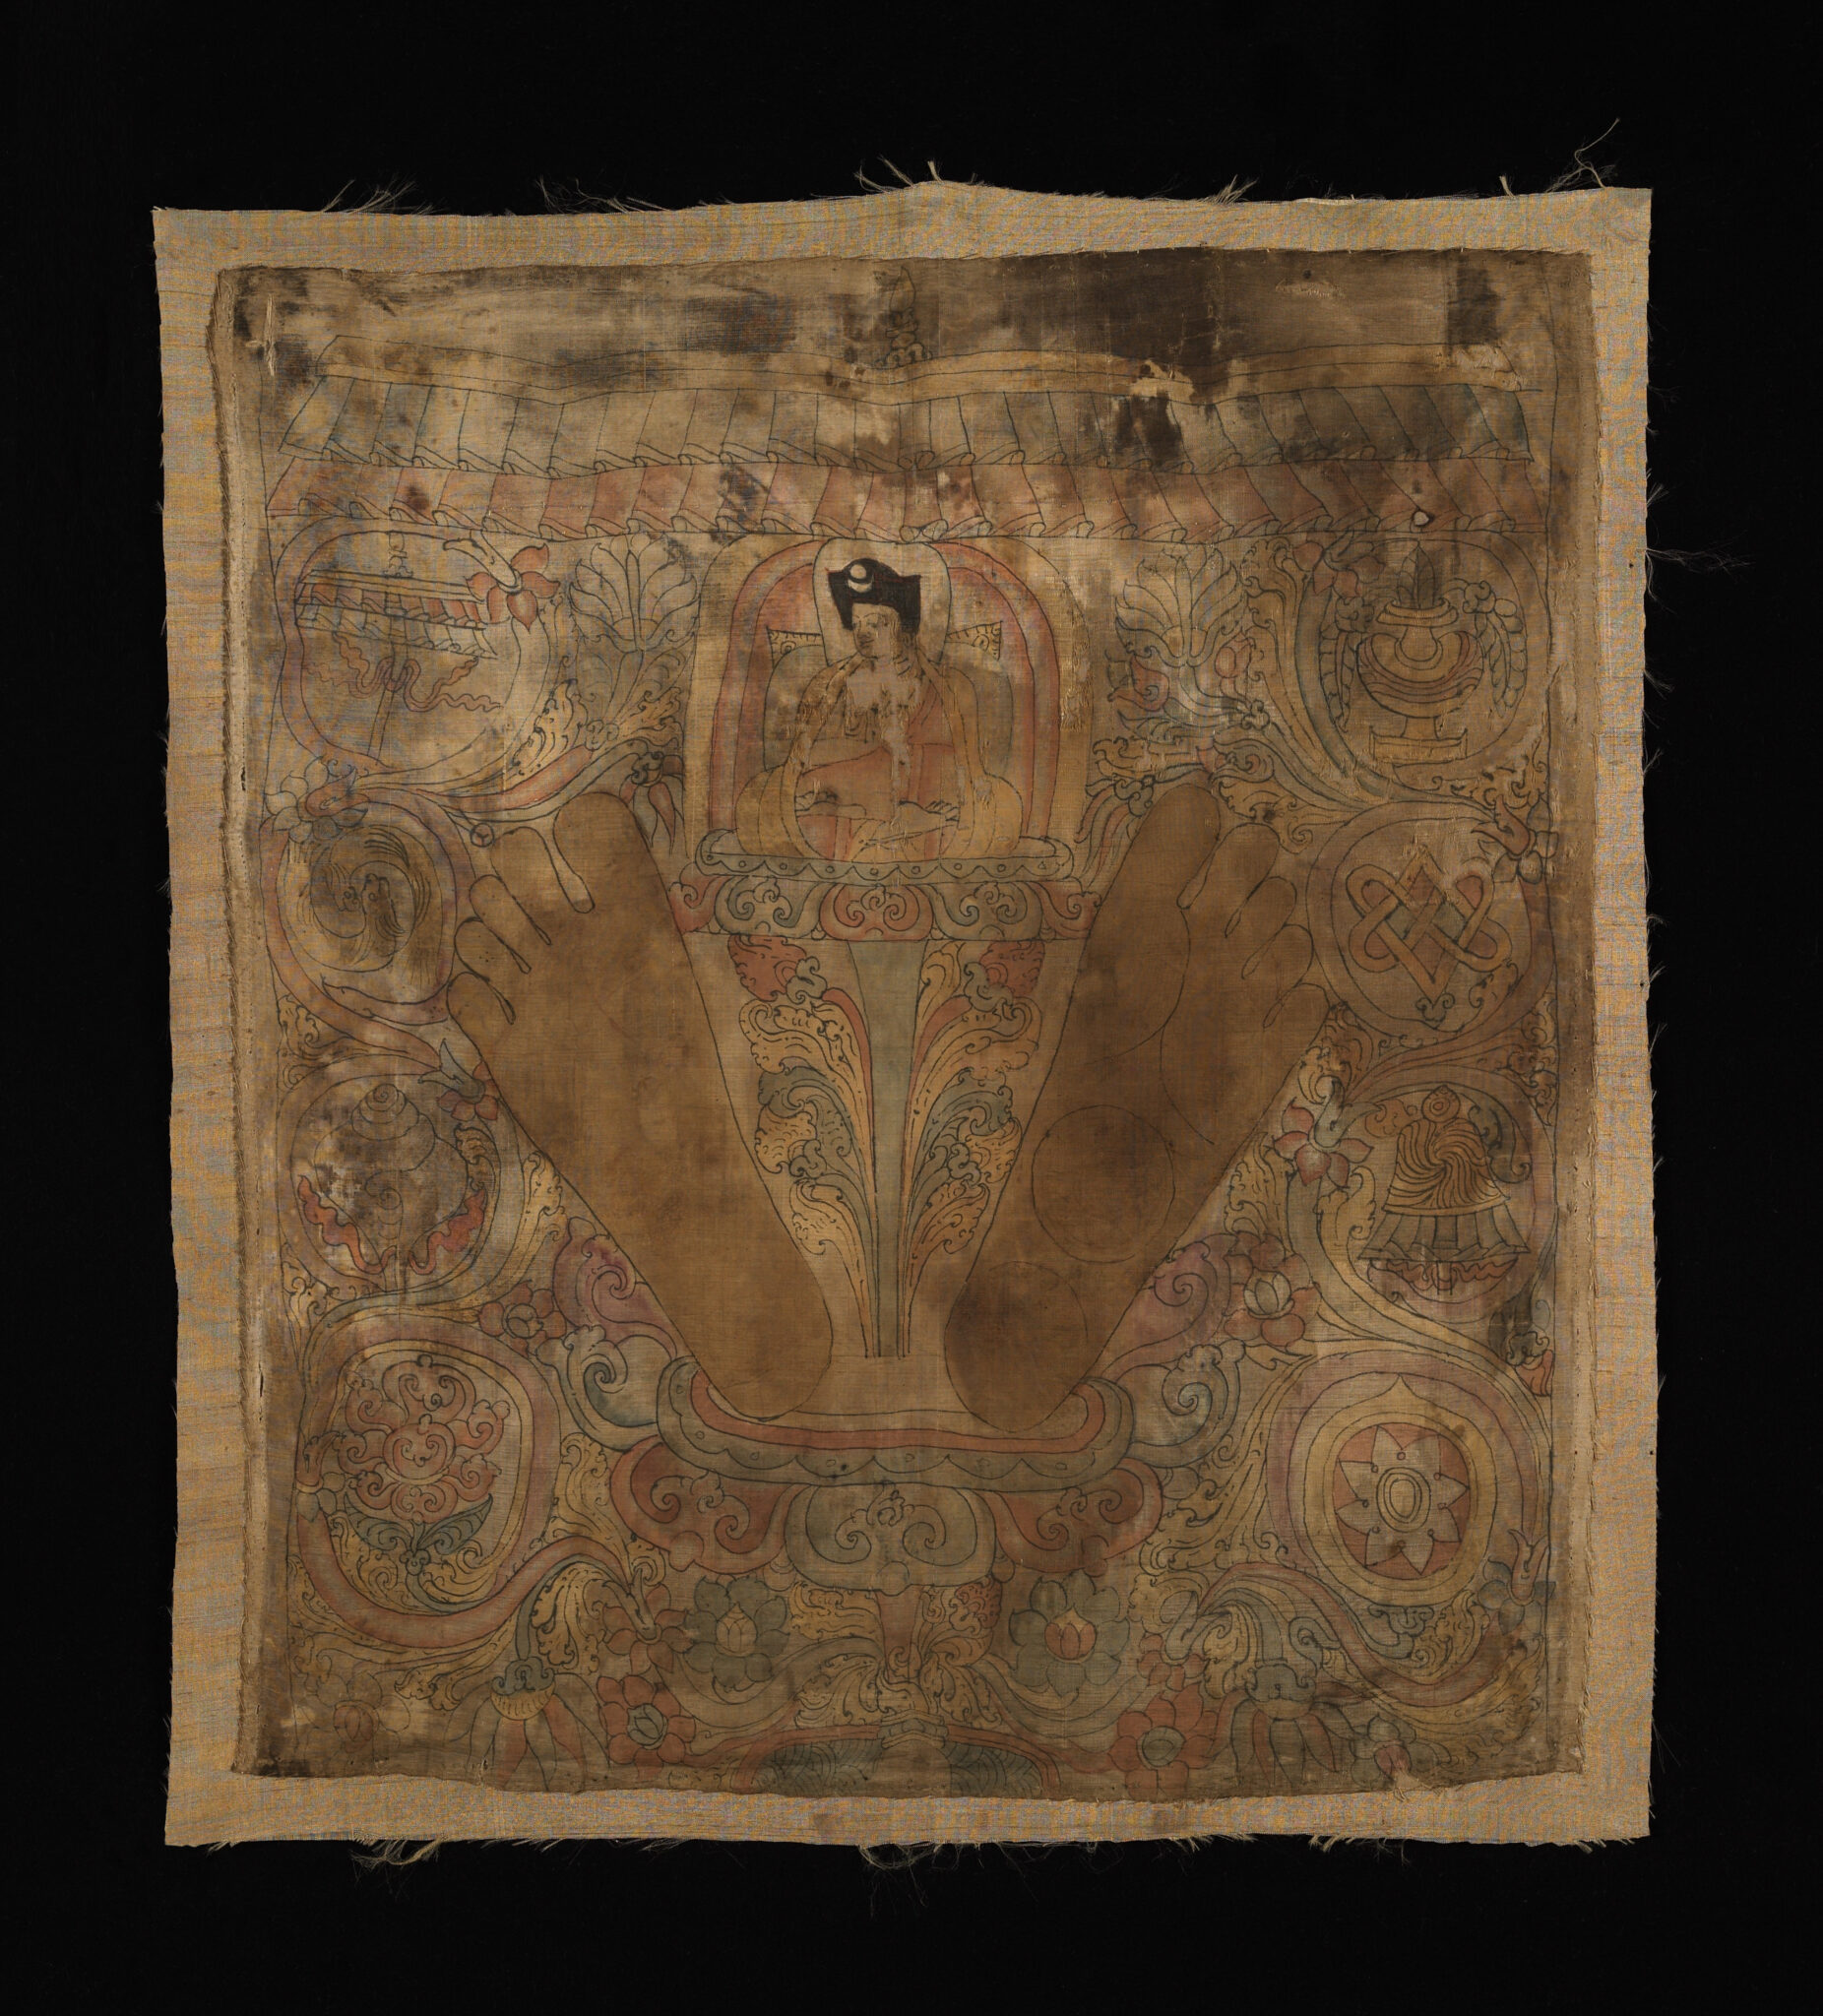 Mottled sepia textile featuring angled footprints standing astride deity seated upon lotus amid floral motifs